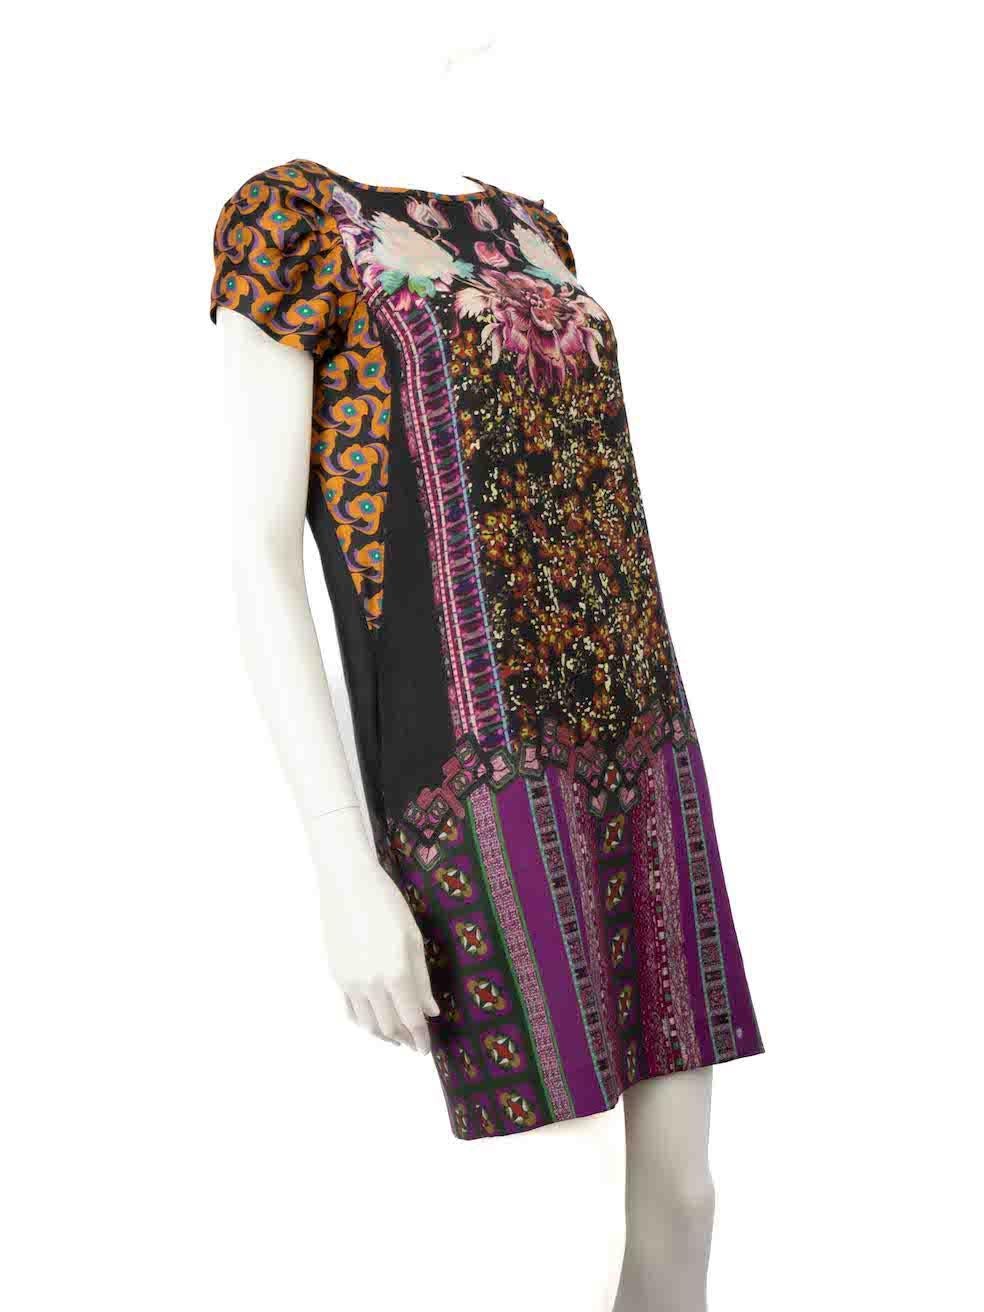 CONDITION is Very good. Hardly any visible wear to dress is evident on this used Etro designer resale item.
 
 
 
 Details
 
 
 Multicolour- black and purple tone
 
 Wool
 
 Dress
 
 Abstract floral pattern
 
 Knee length
 
 Short sleeves
 
 Round